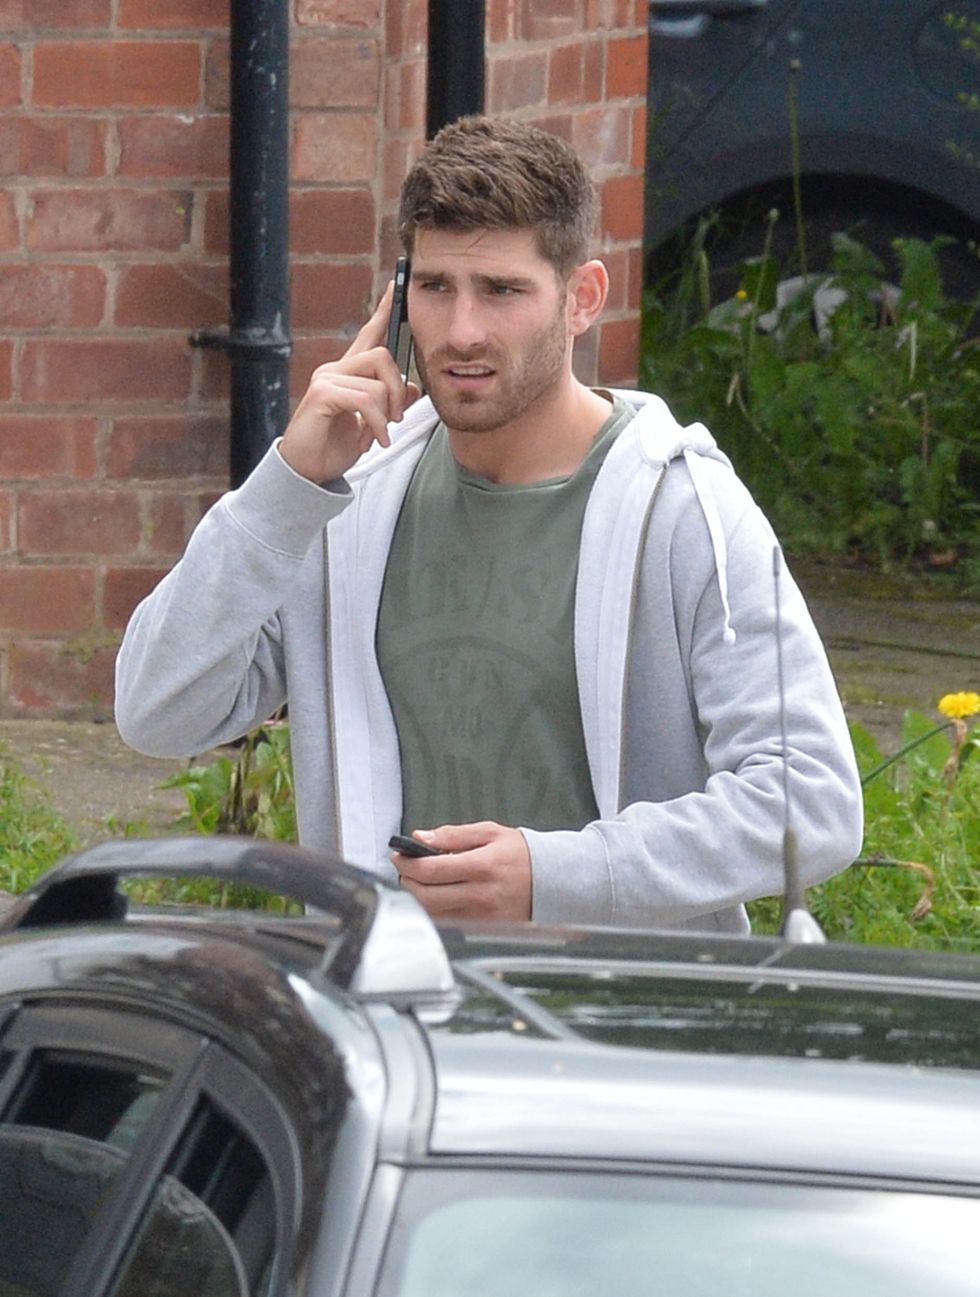 Ched Evans has won an appeal against his conviction for rape